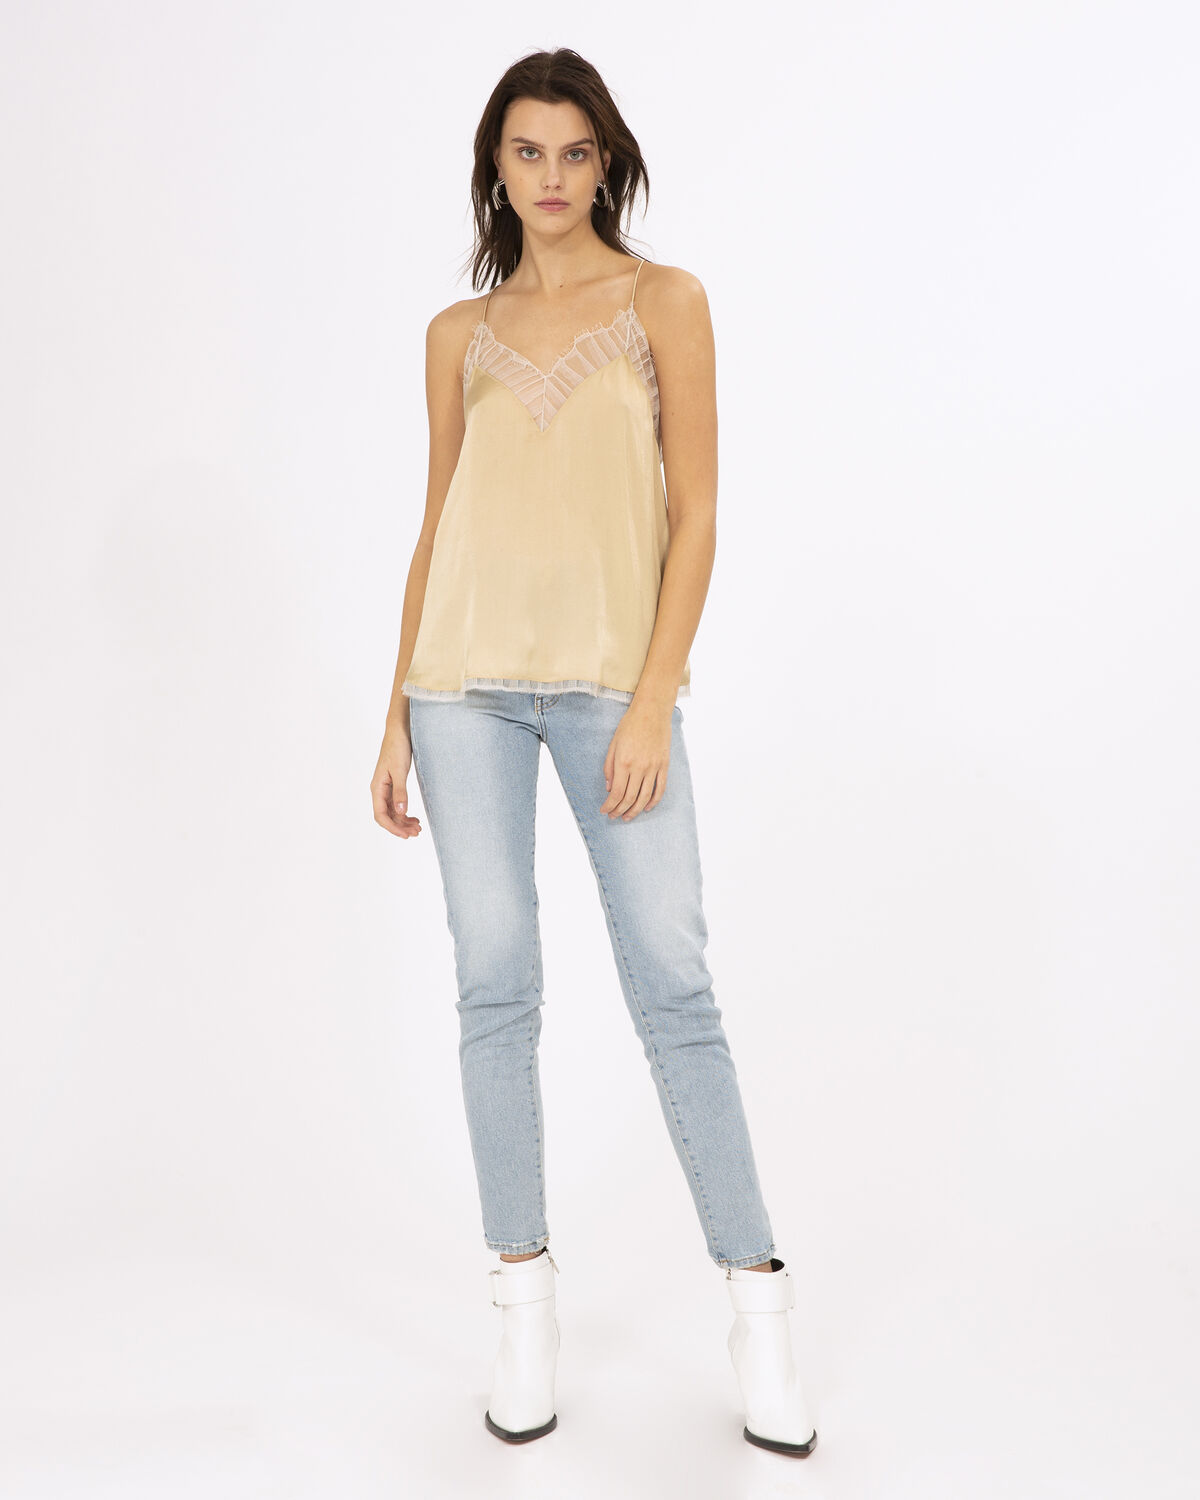 Photo of IRO Paris Berwyn Top Beige - Fluid And Airy, This Silk Top Is Distinguished By Its Lace Details, For A Romantic And Refined Look. It Is One Of Iro's Most Iconic Pieces. New In